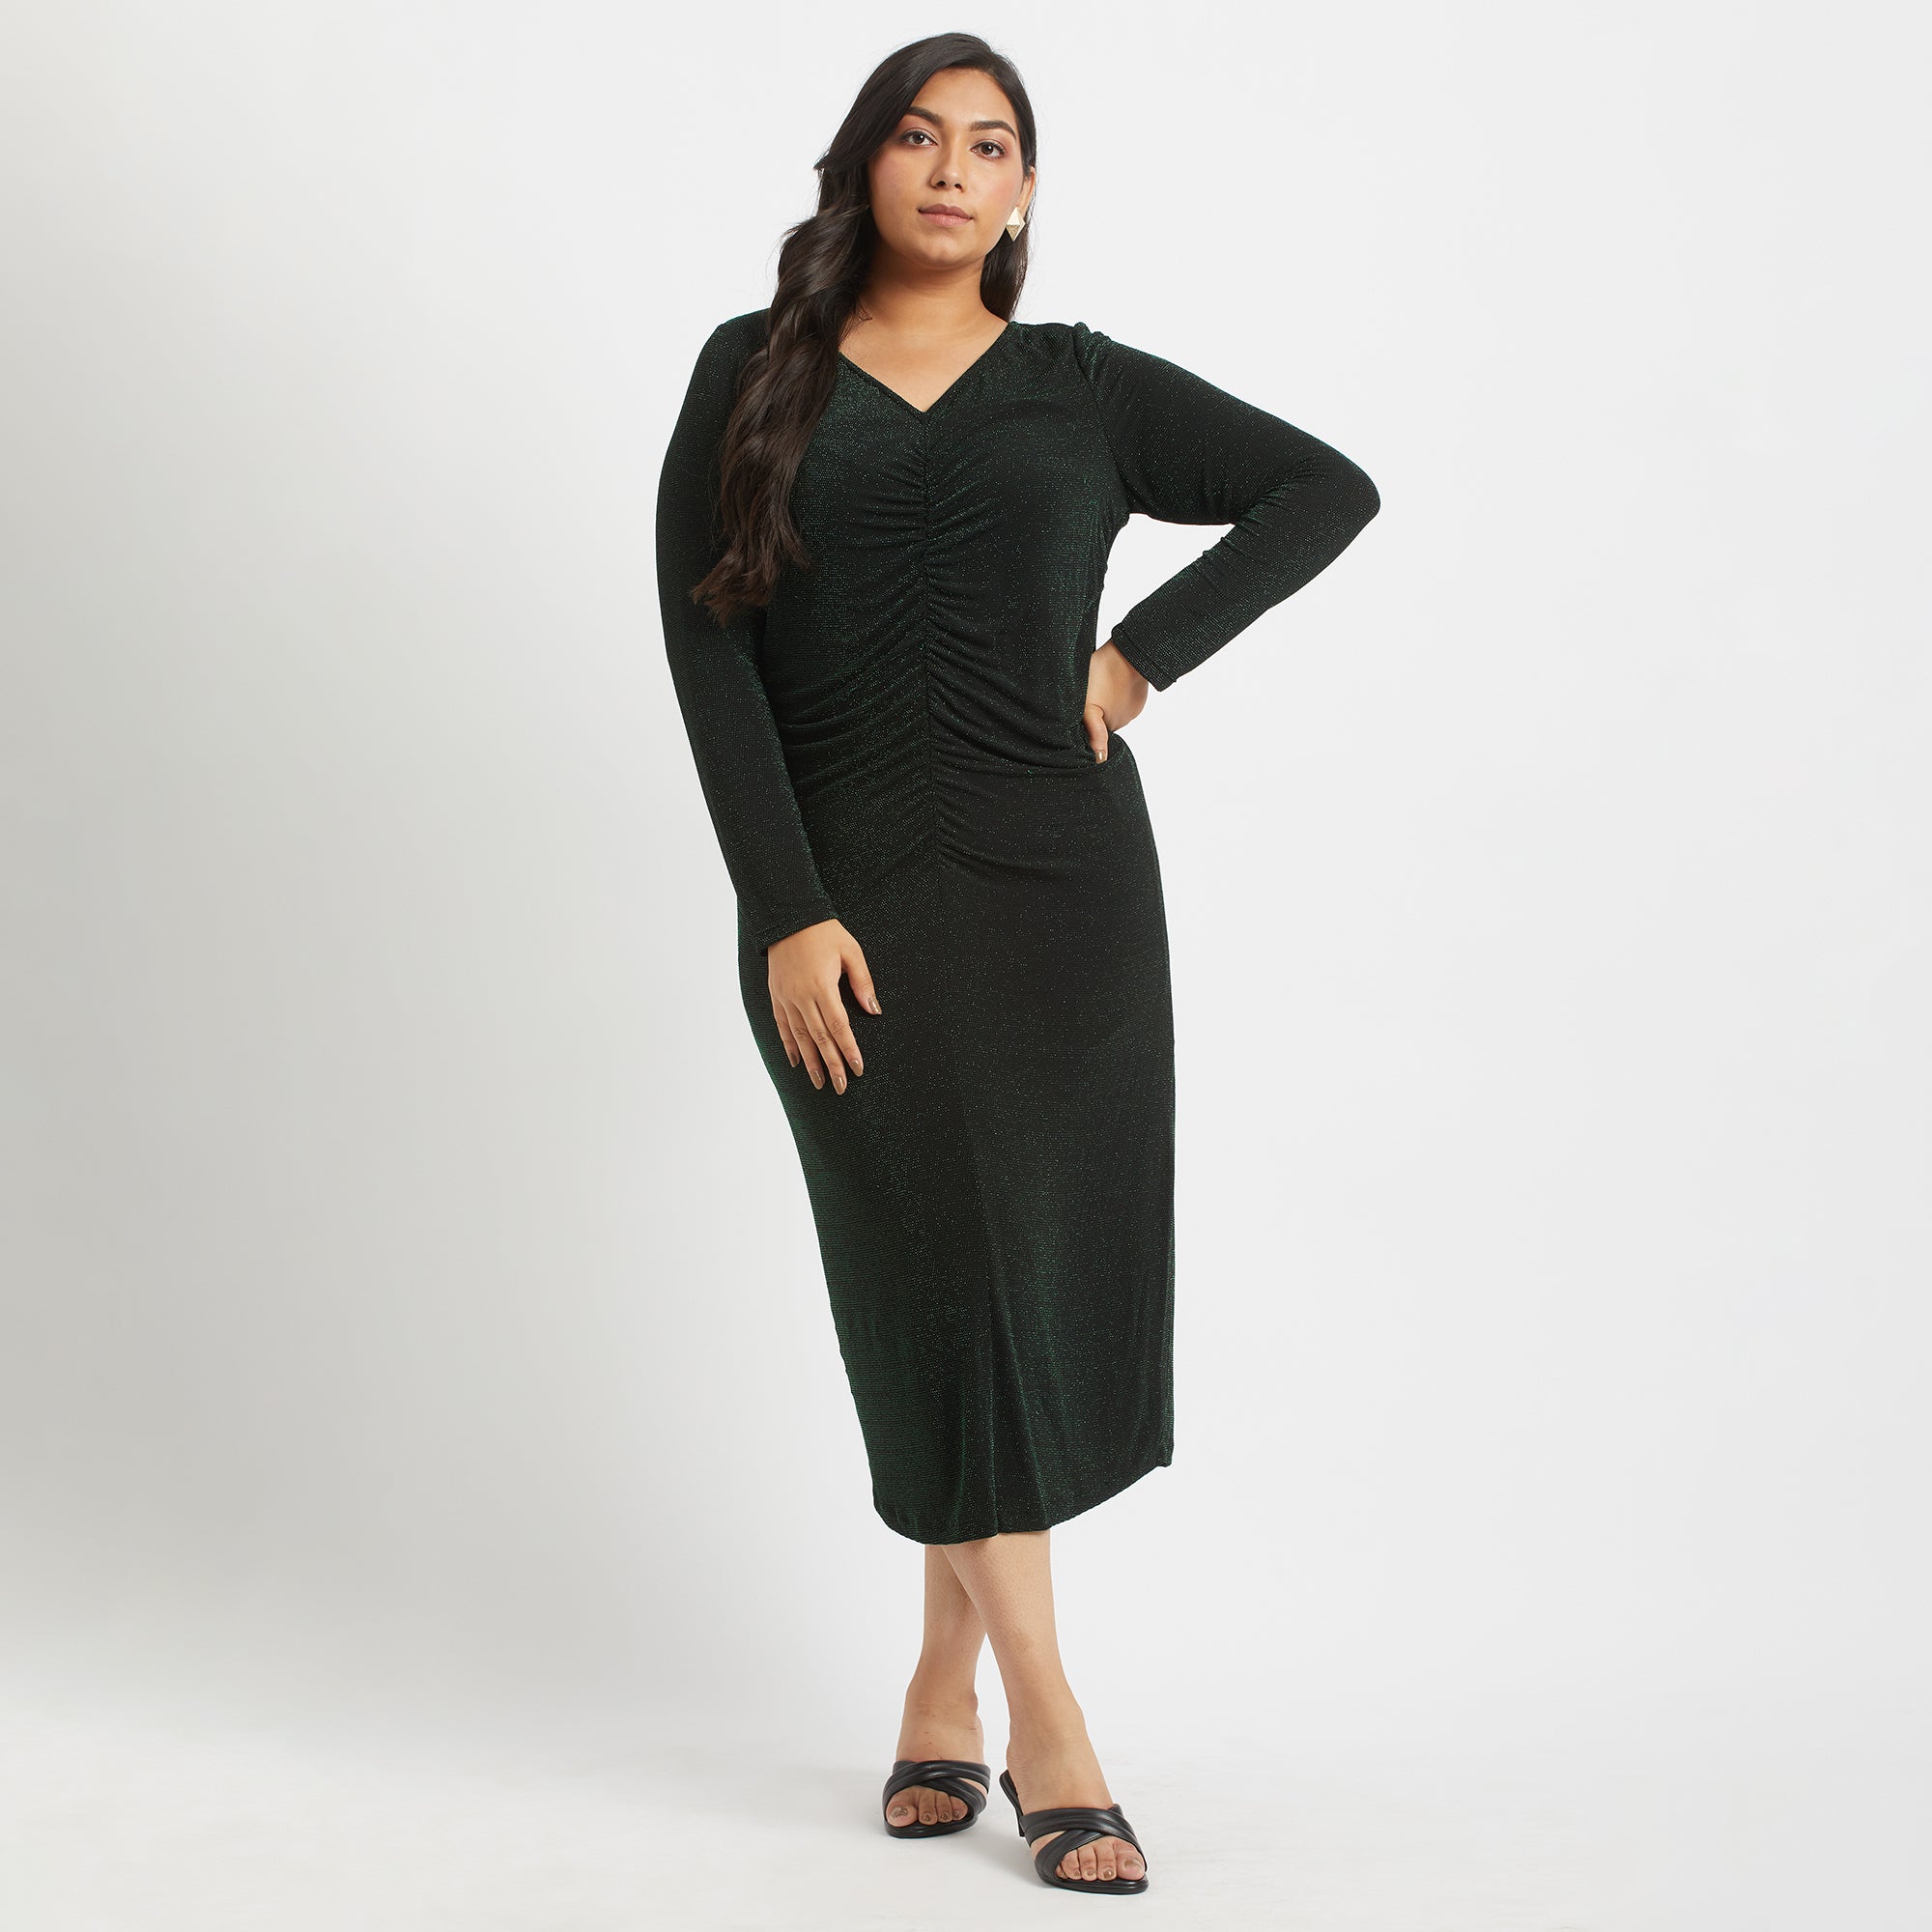 Emerald Essence Ruched Dress for Plus Size Women